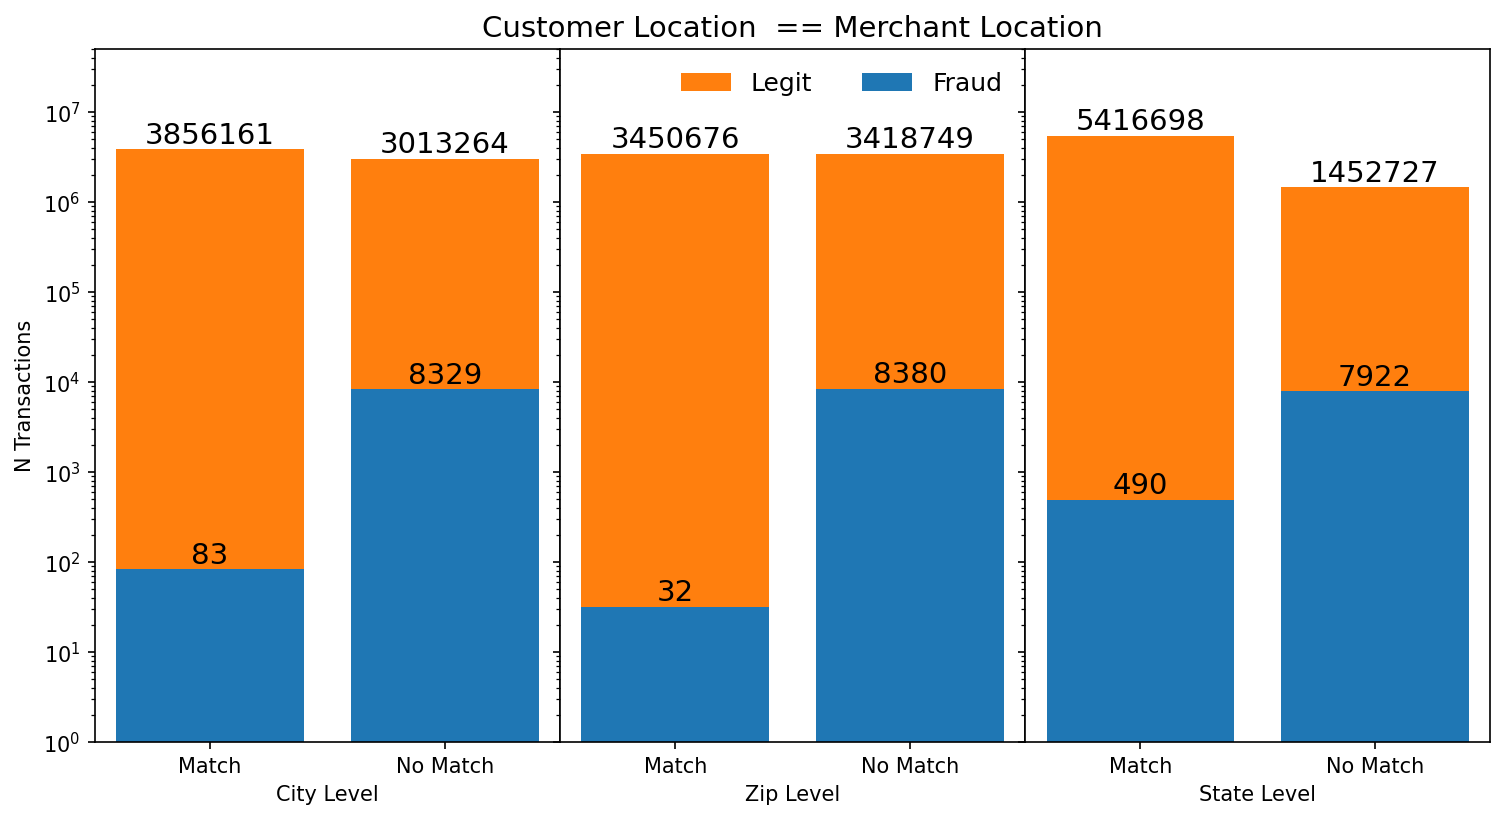 Bar plots at the city, zip-code, and state level showing all transactions and whether the customer location at each level matches the merchant location at the same level. Each bar of transactions is subsequently split into legitimate and fraudulent transactions.